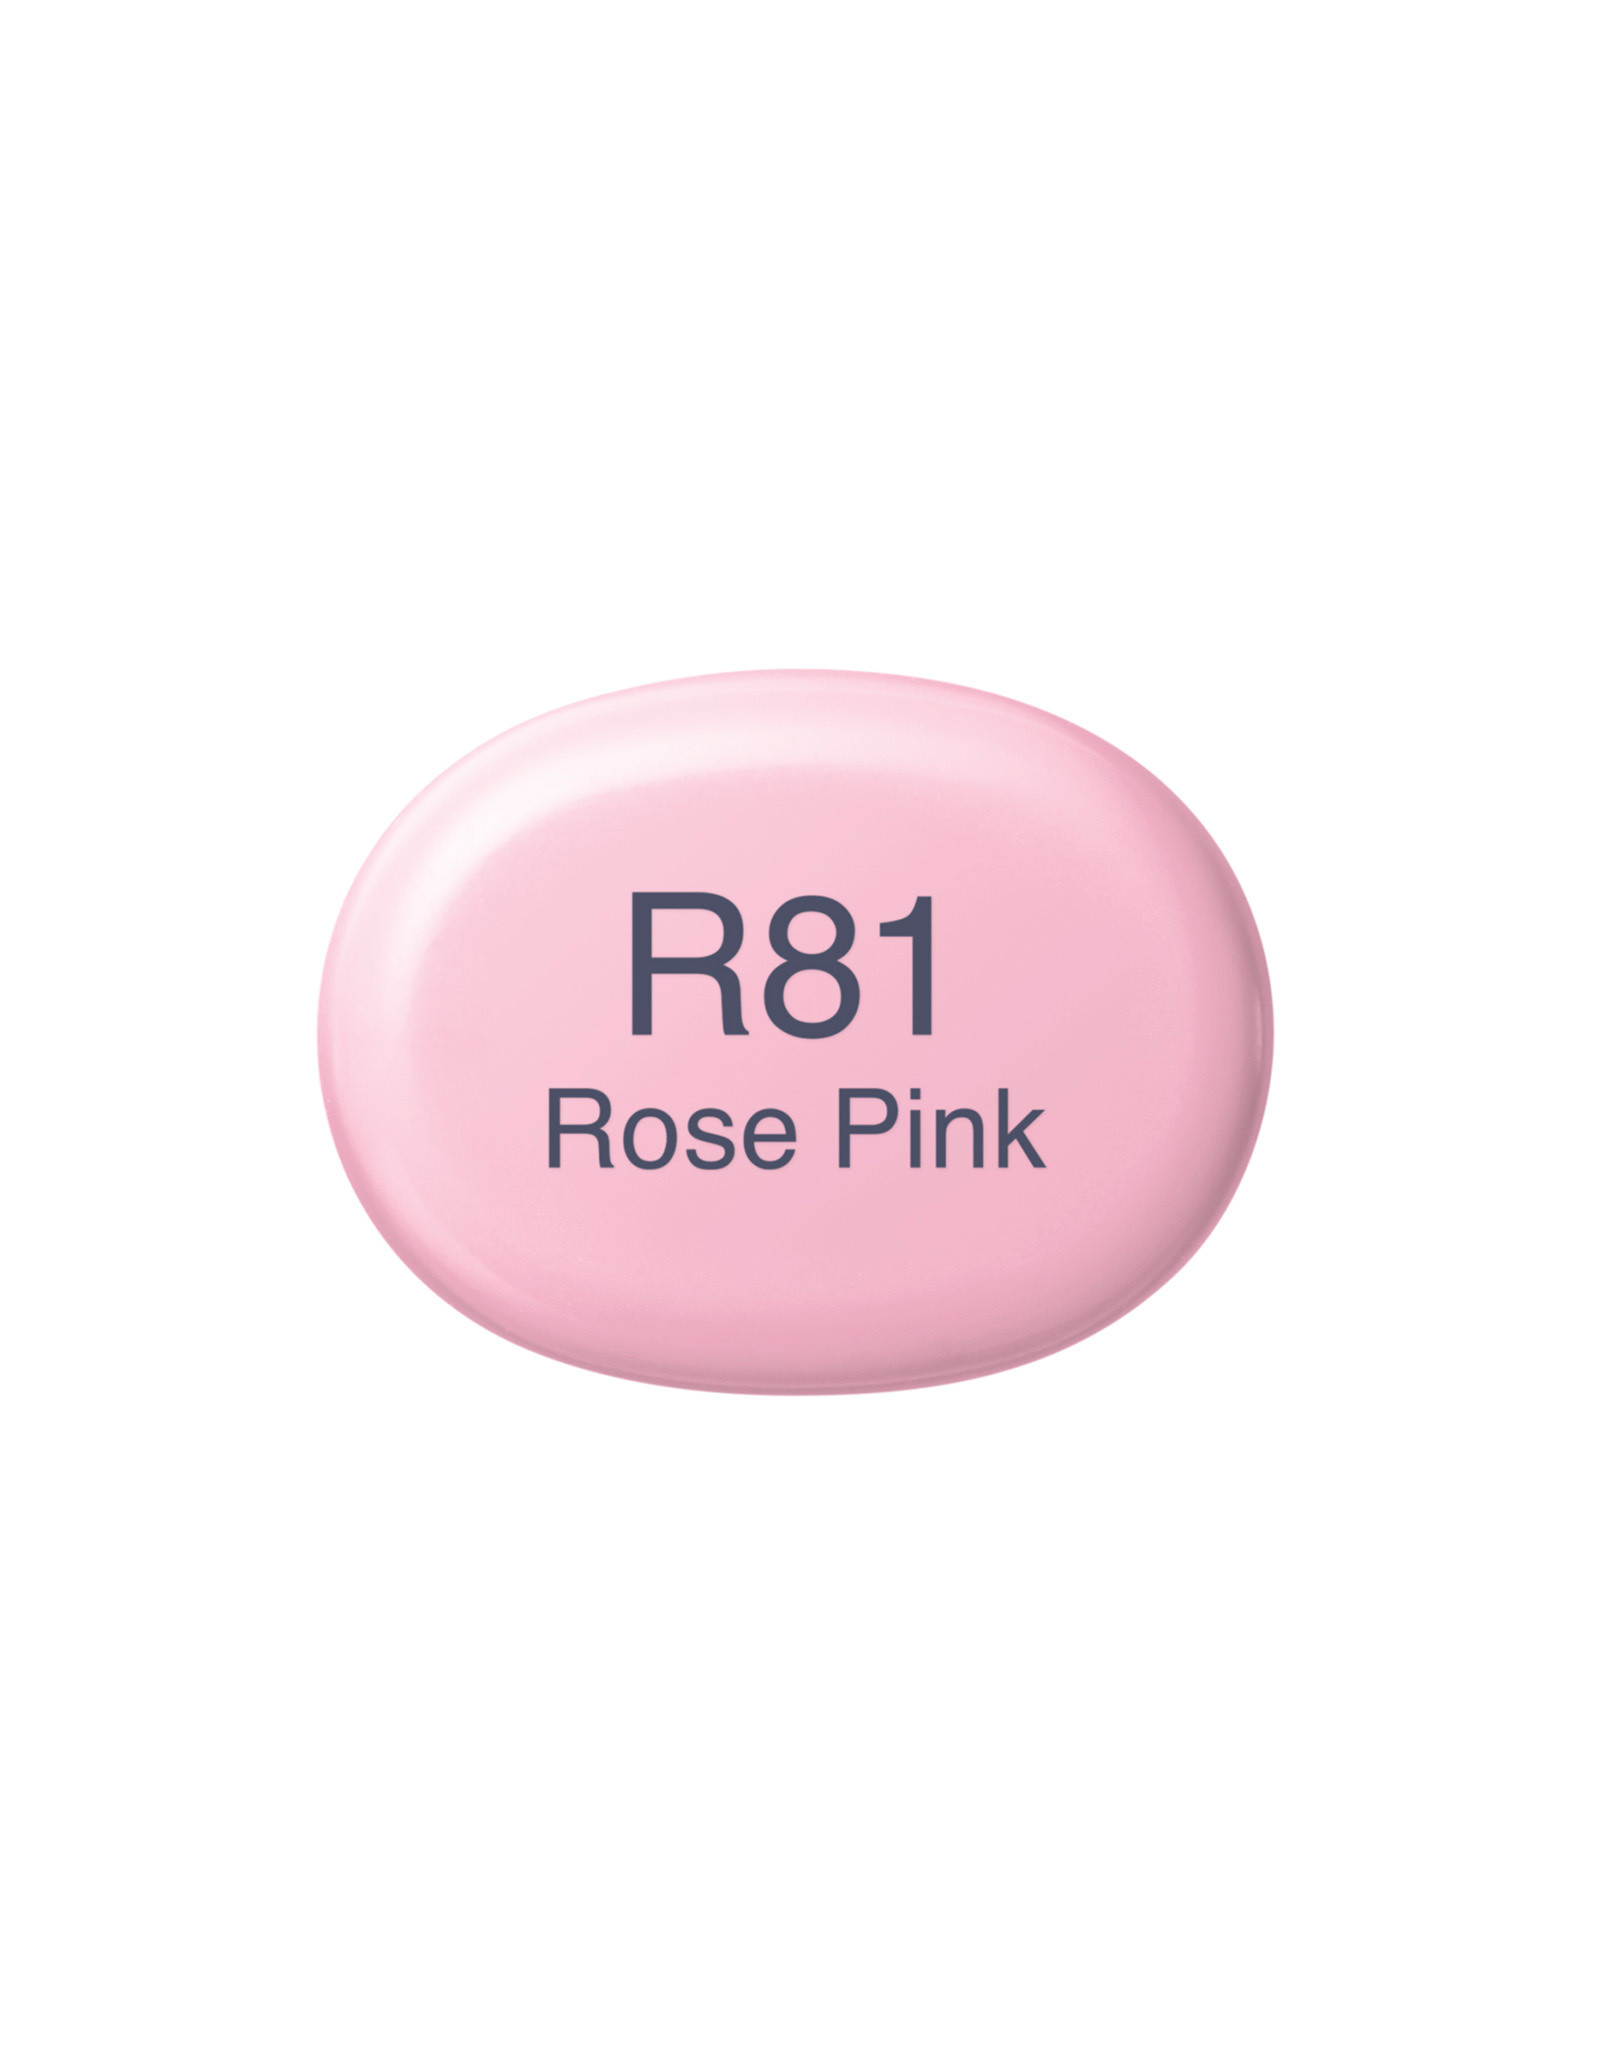 COPIC COPIC Sketch Marker R81 Rose Pink